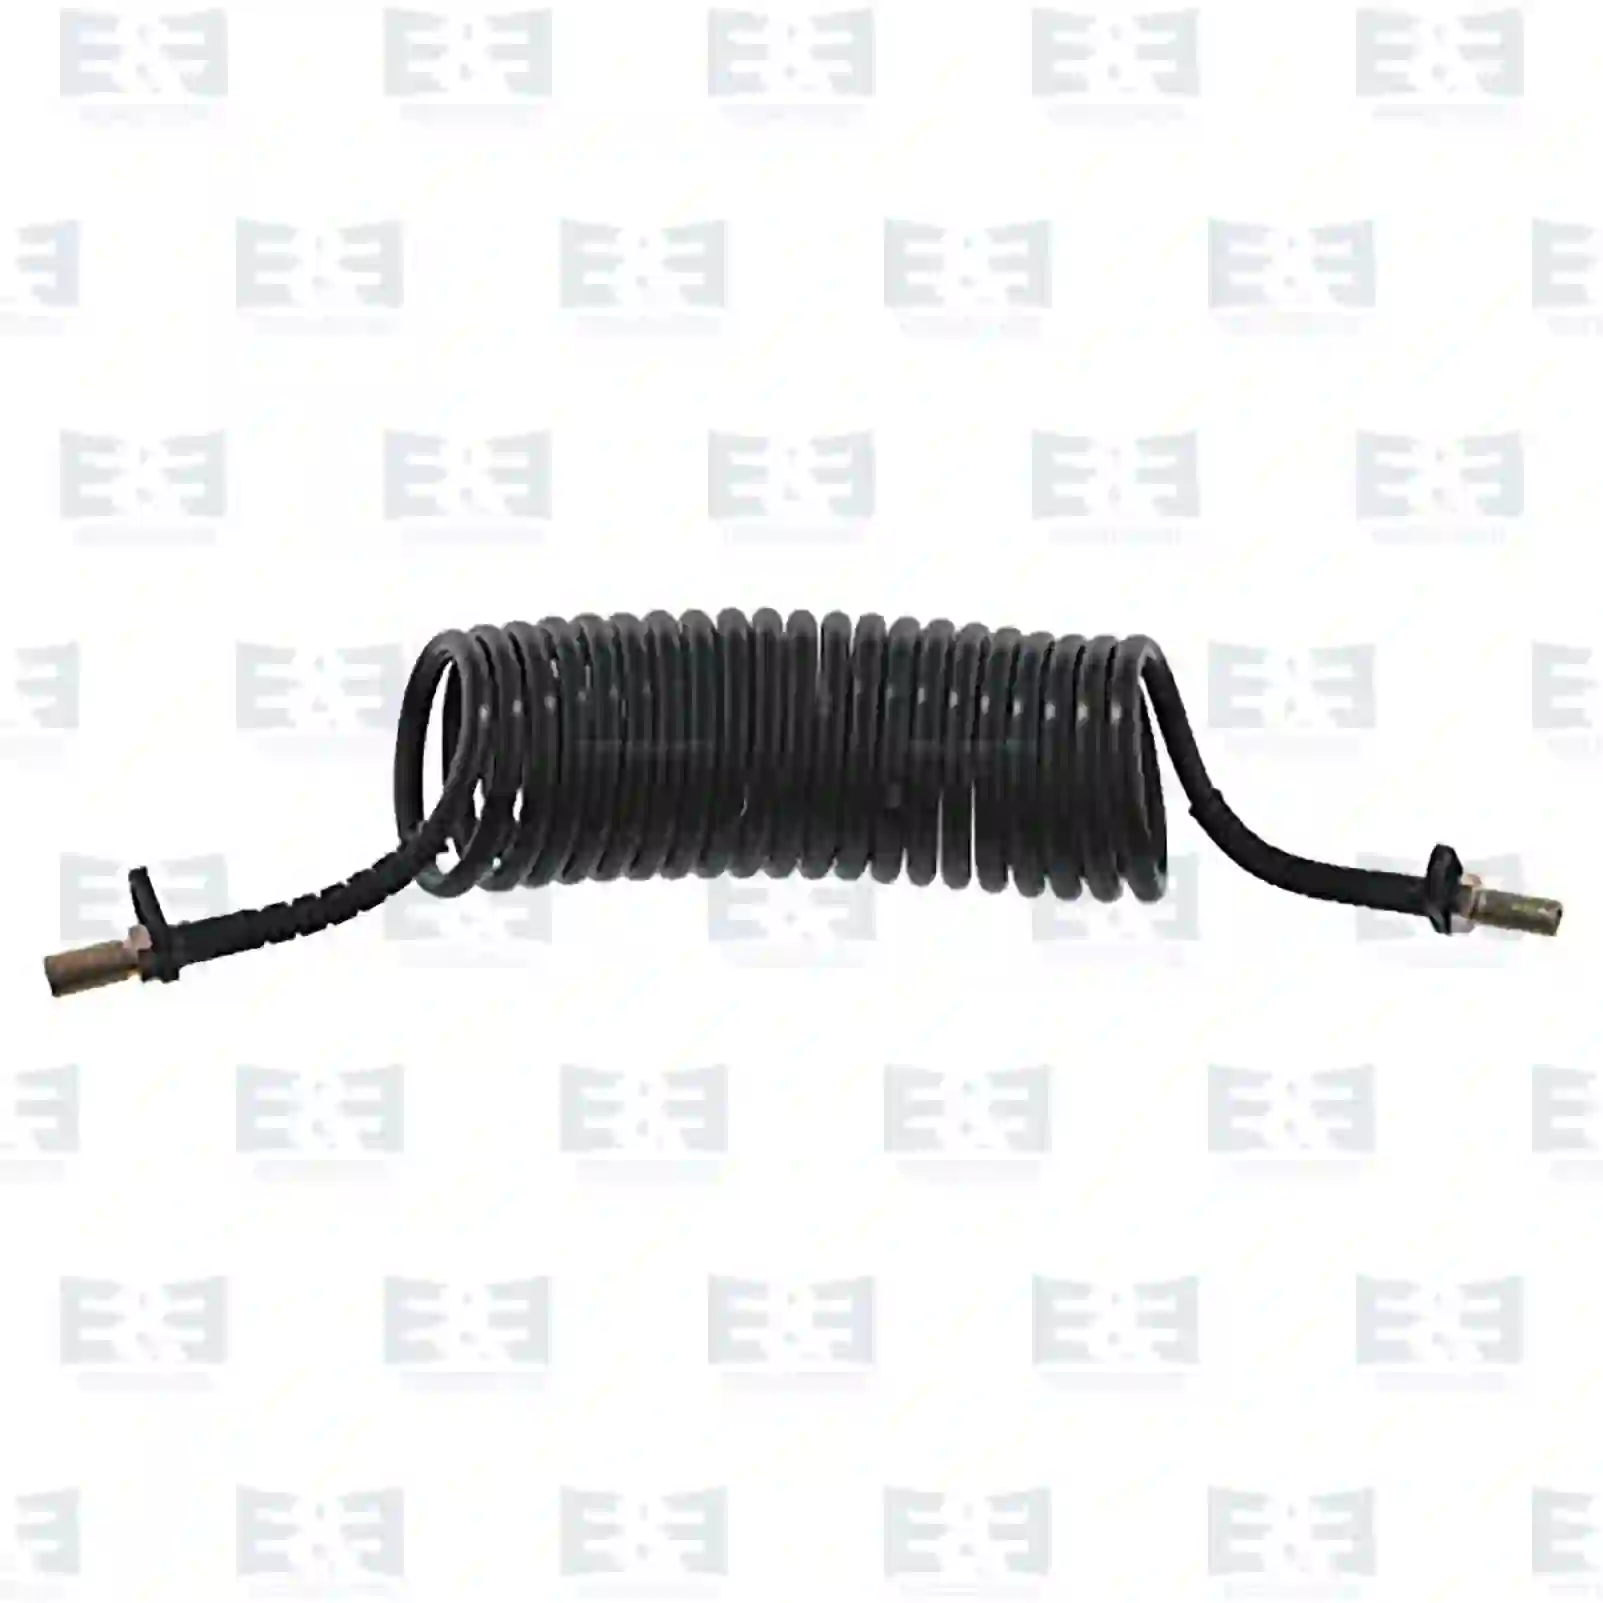 Compressed Air Air spiral, EE No 2E2286242 ,  oem no:1518052, 81963400323, 81963400408, 81963400417, 81963400810, 81963400902, 2V5611707 E&E Truck Spare Parts | Truck Spare Parts, Auotomotive Spare Parts